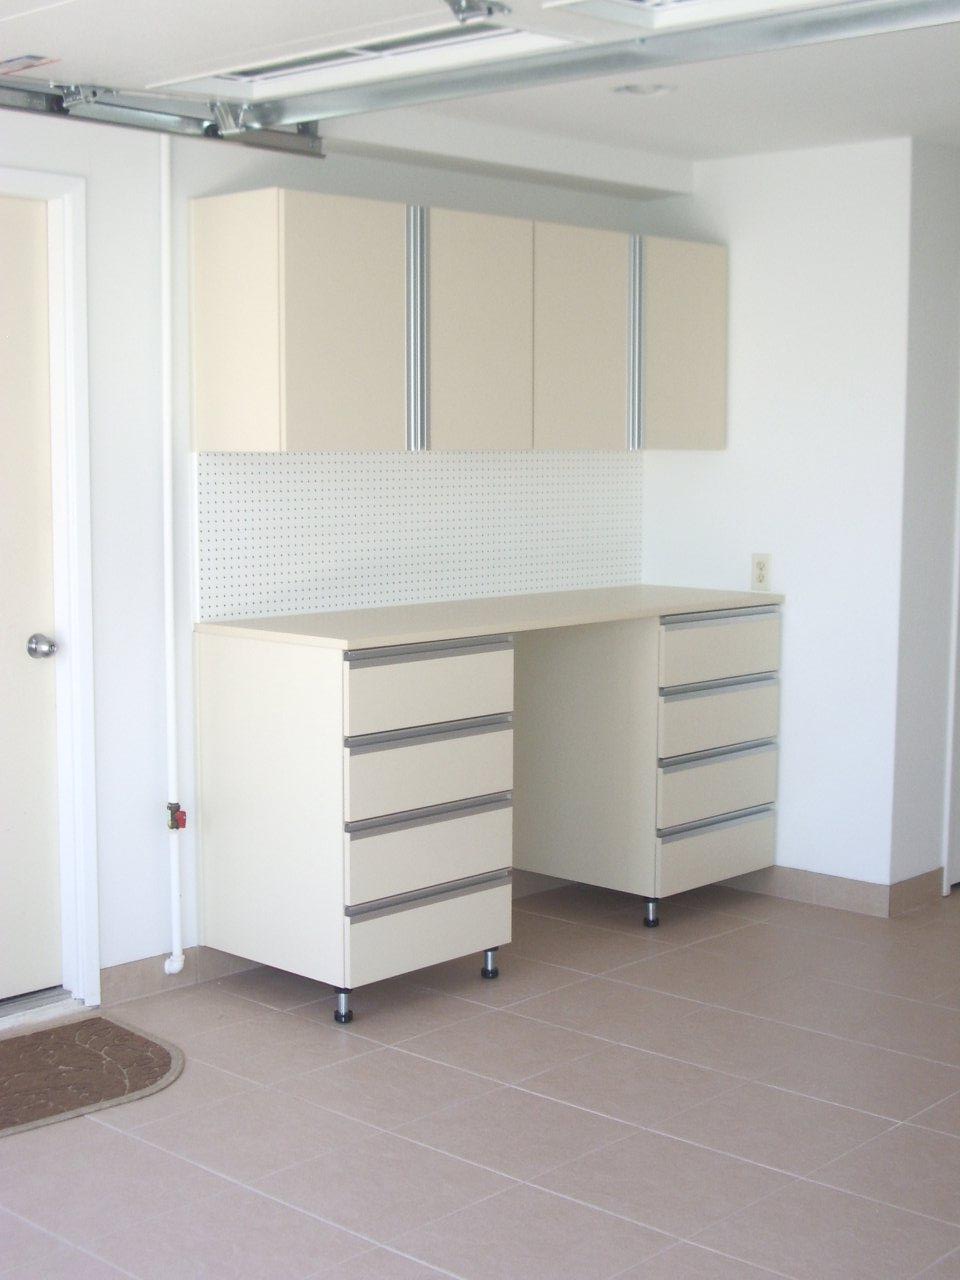 Rubbermaid Garage Cabinets & Storage Systems at